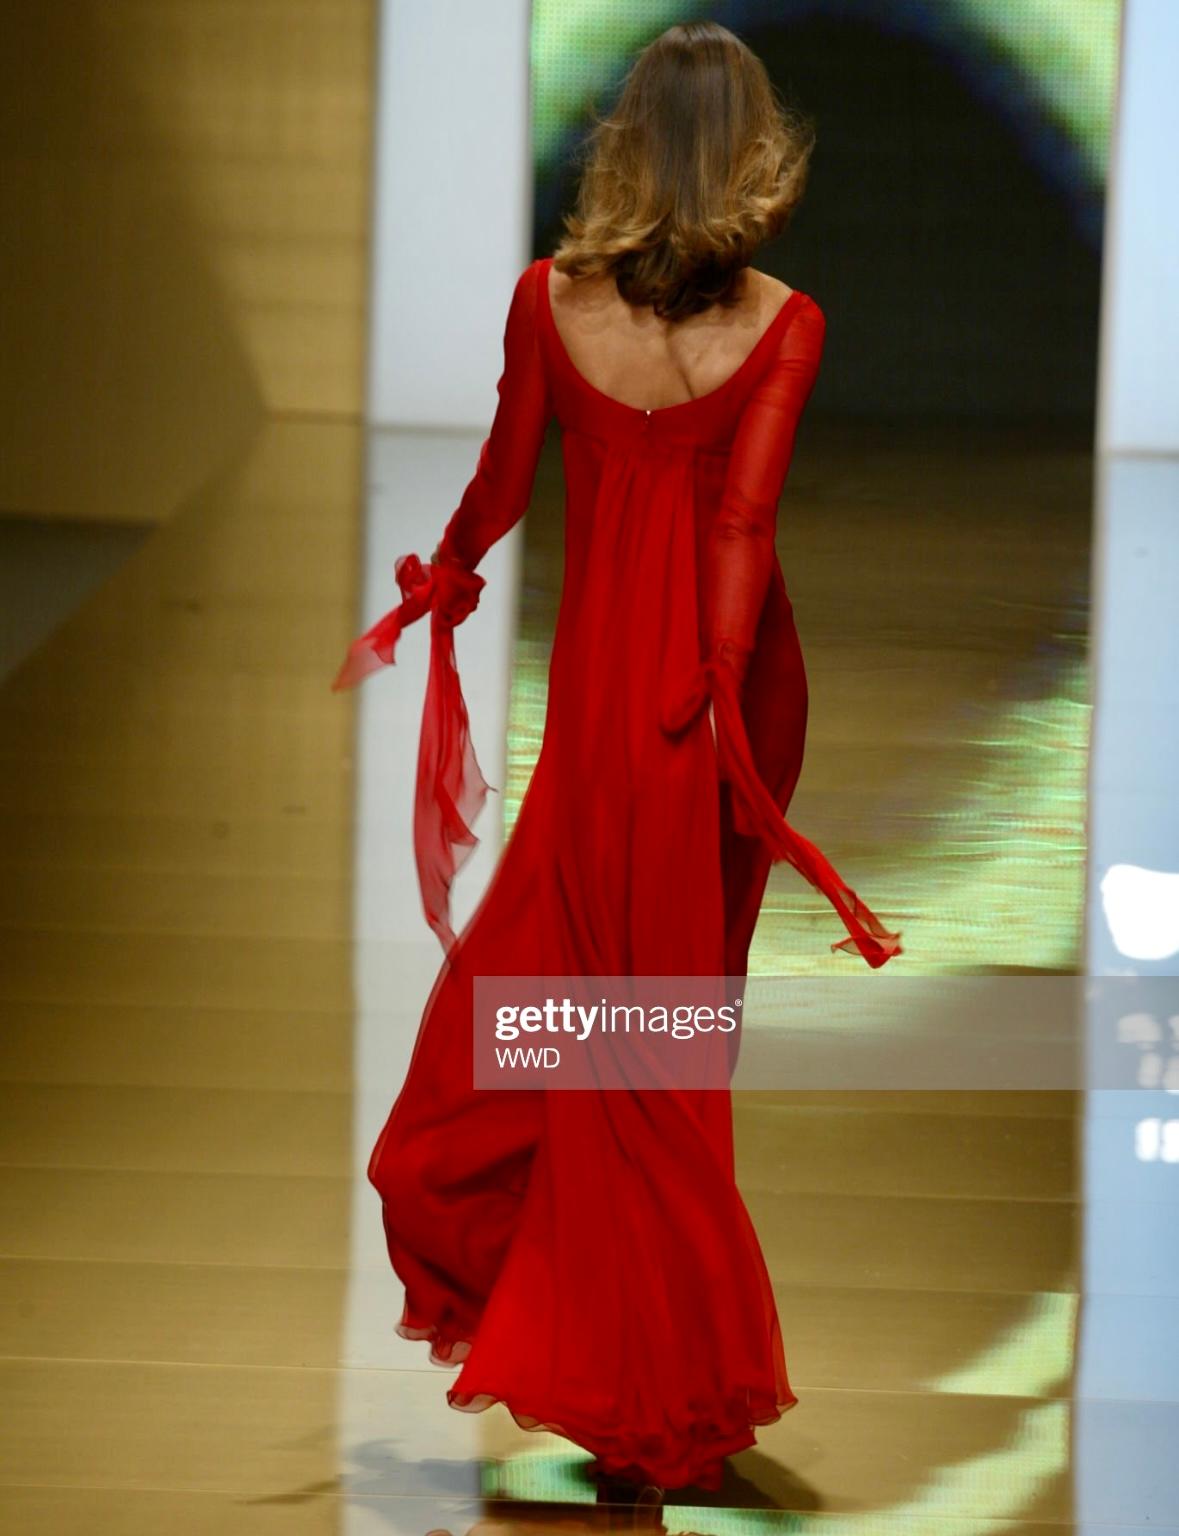 NWT F/W 2002 Valentino Garavani Runway Finale Red Silk Chiffon Train Gown In Excellent Condition For Sale In West Hollywood, CA